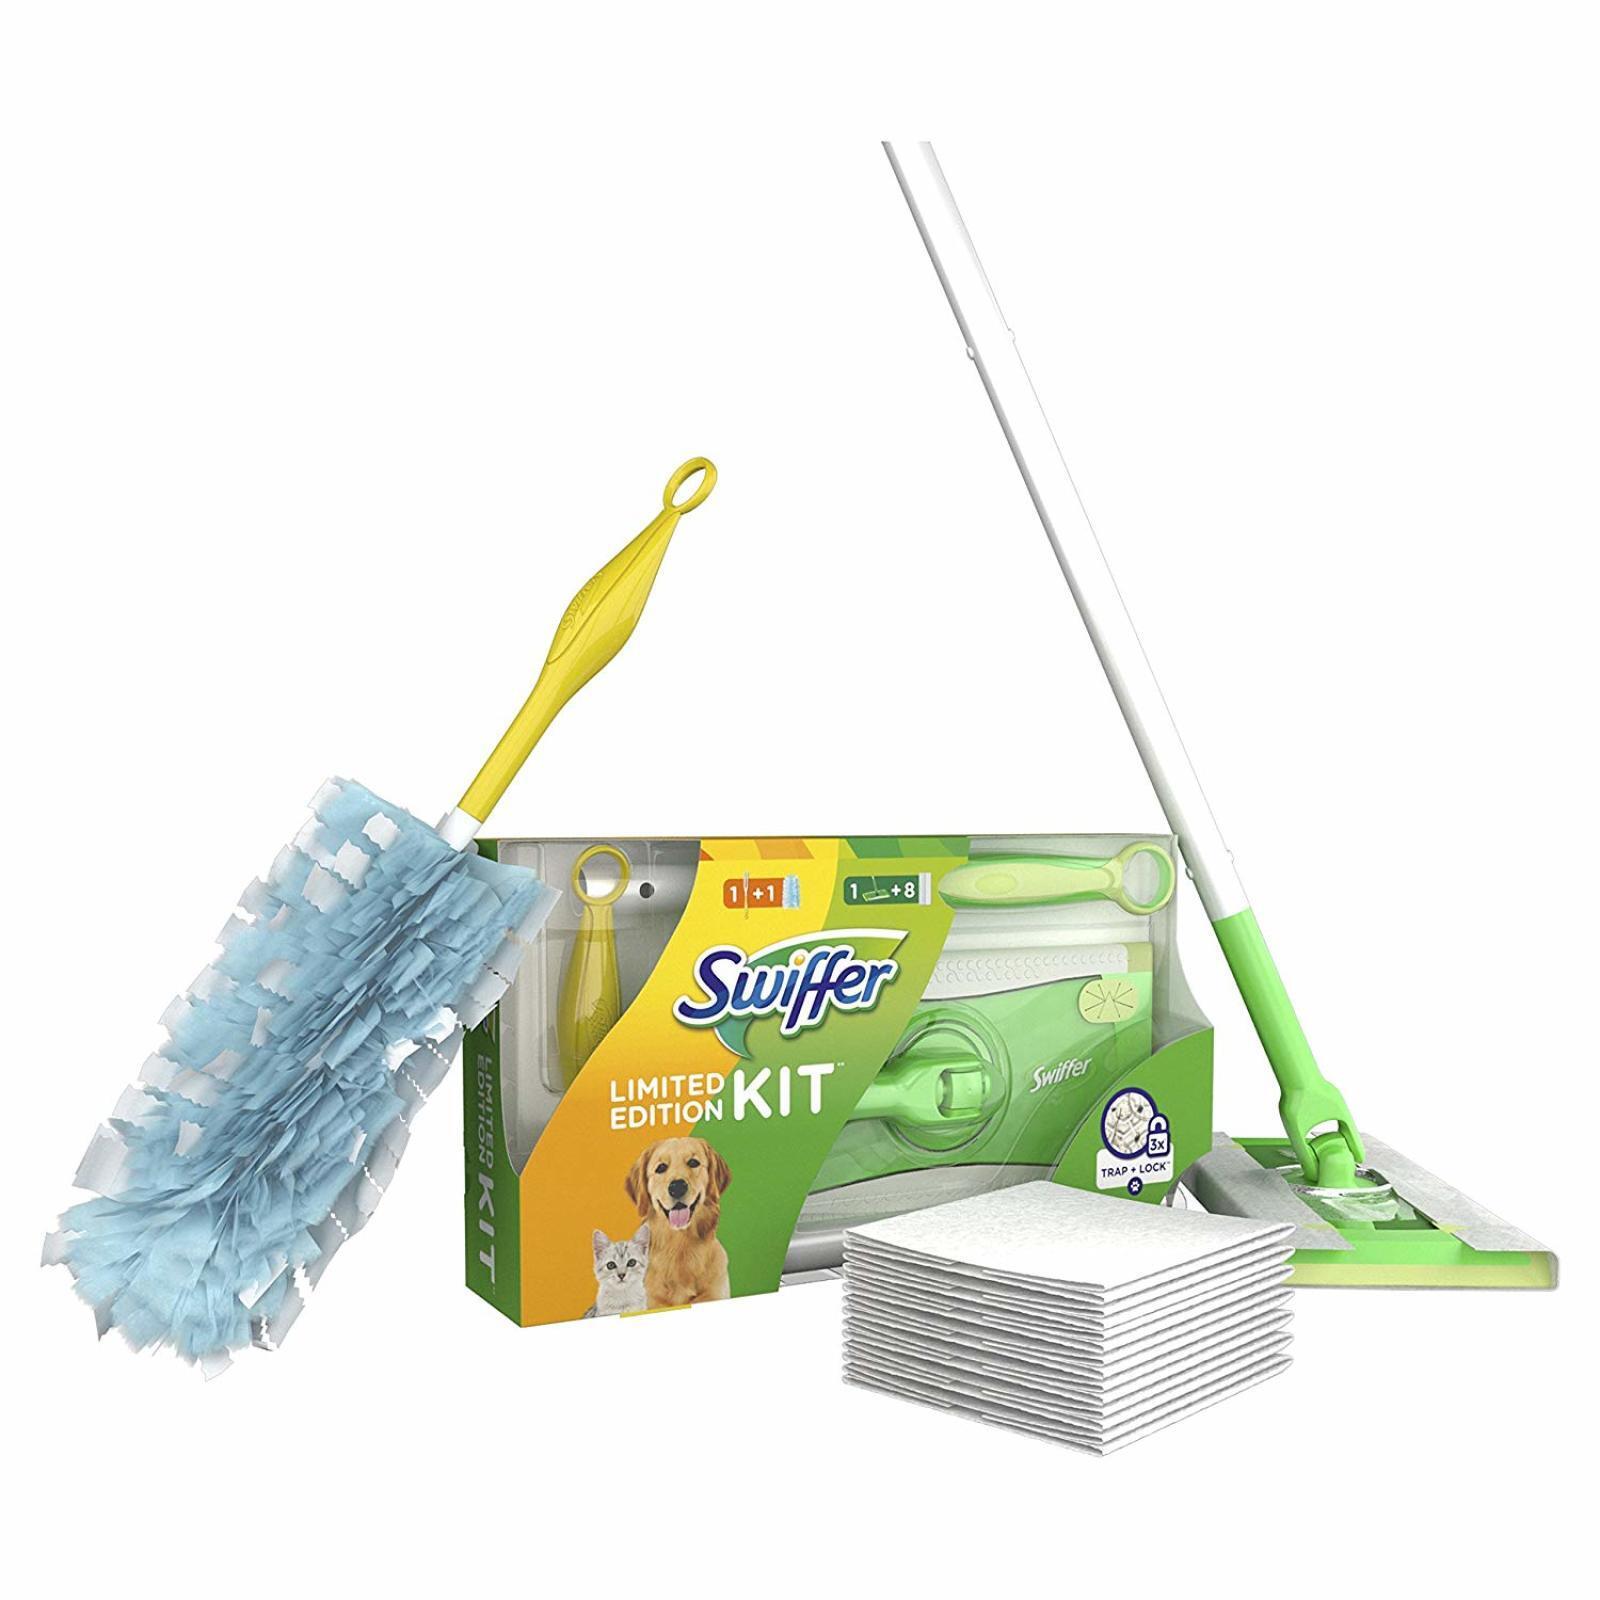 Swiffer Limited Edition Set 1 Floor Mop 8 Basic Dusters 1 Dust